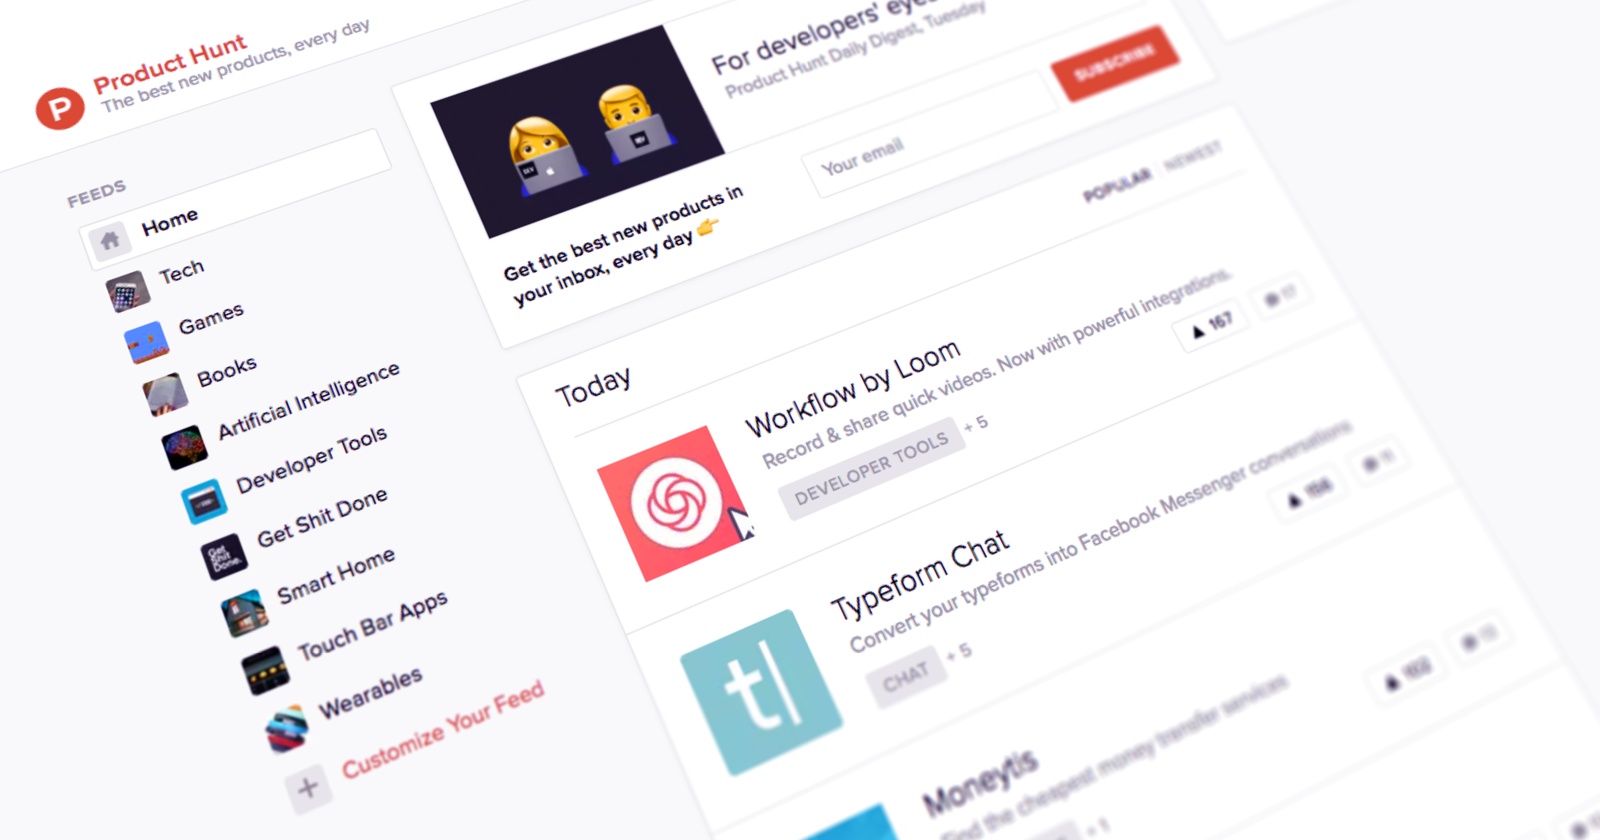 how to get featured on product hunt